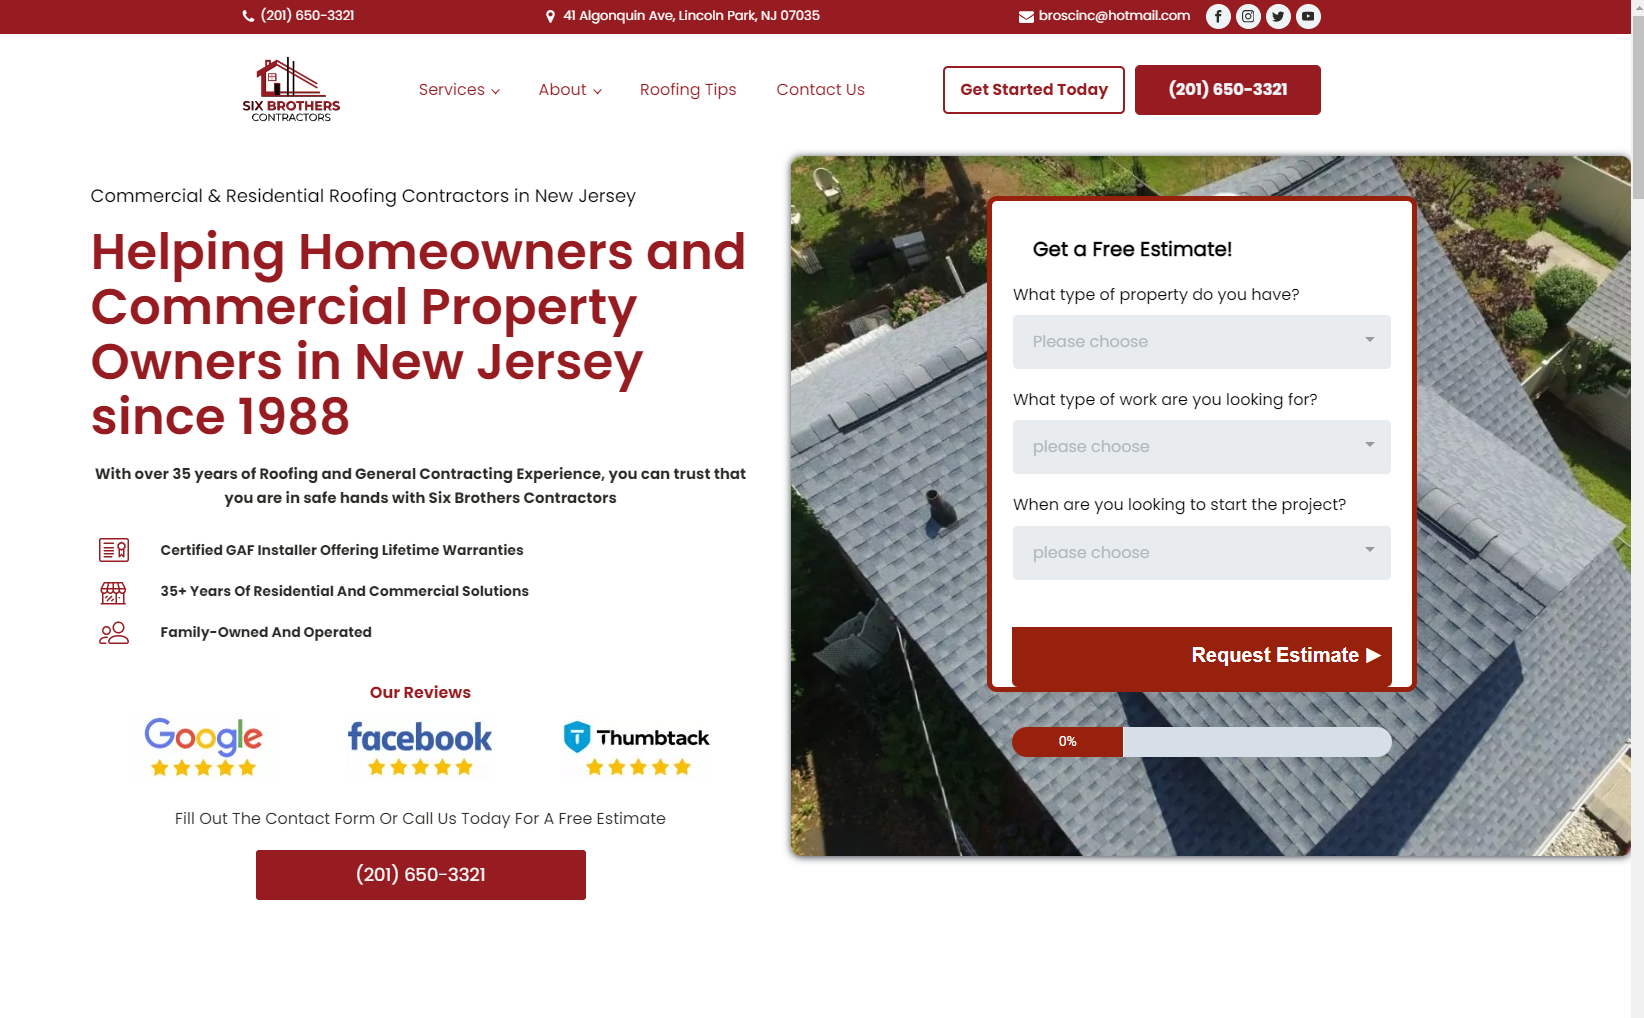 Six Brothers Contractors Reveals Surprising Trends in Commercial Roof Replacement Costs Across New Jersey